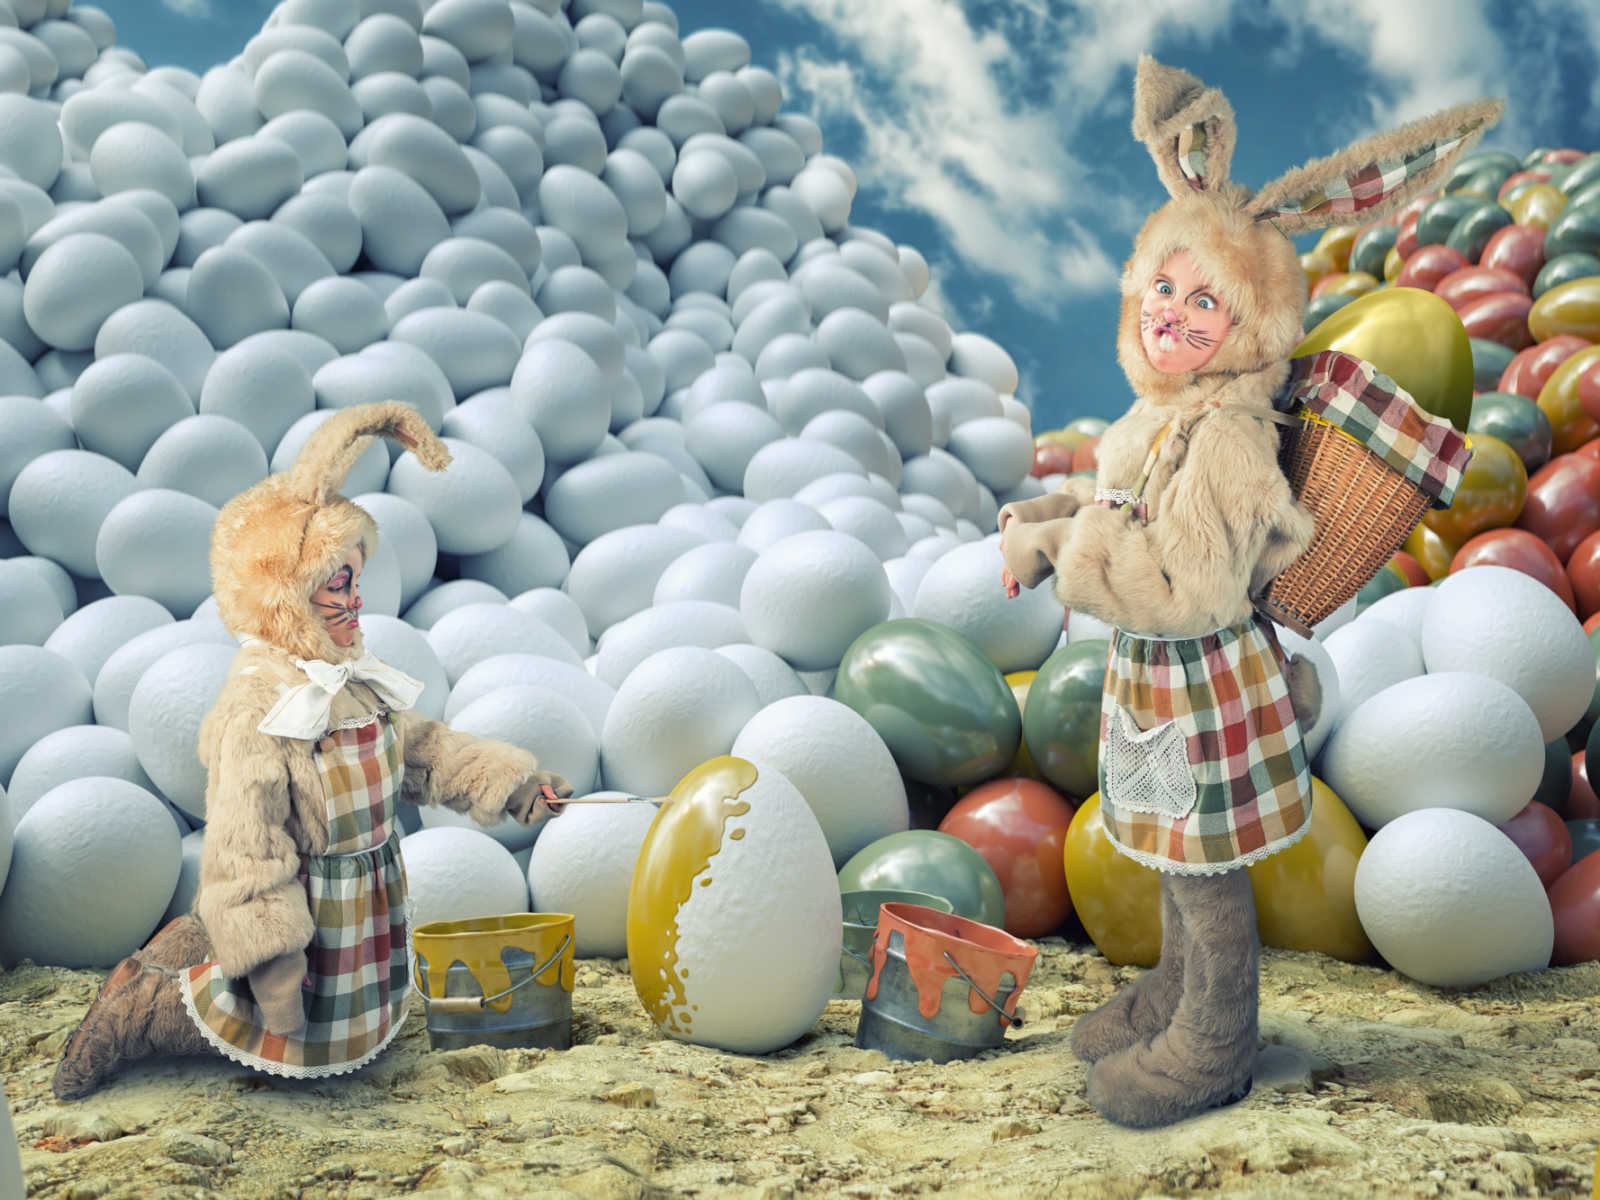 a young girl bunny costume painting white eggs and another girl standing in bunny costume with painted eggs behind her